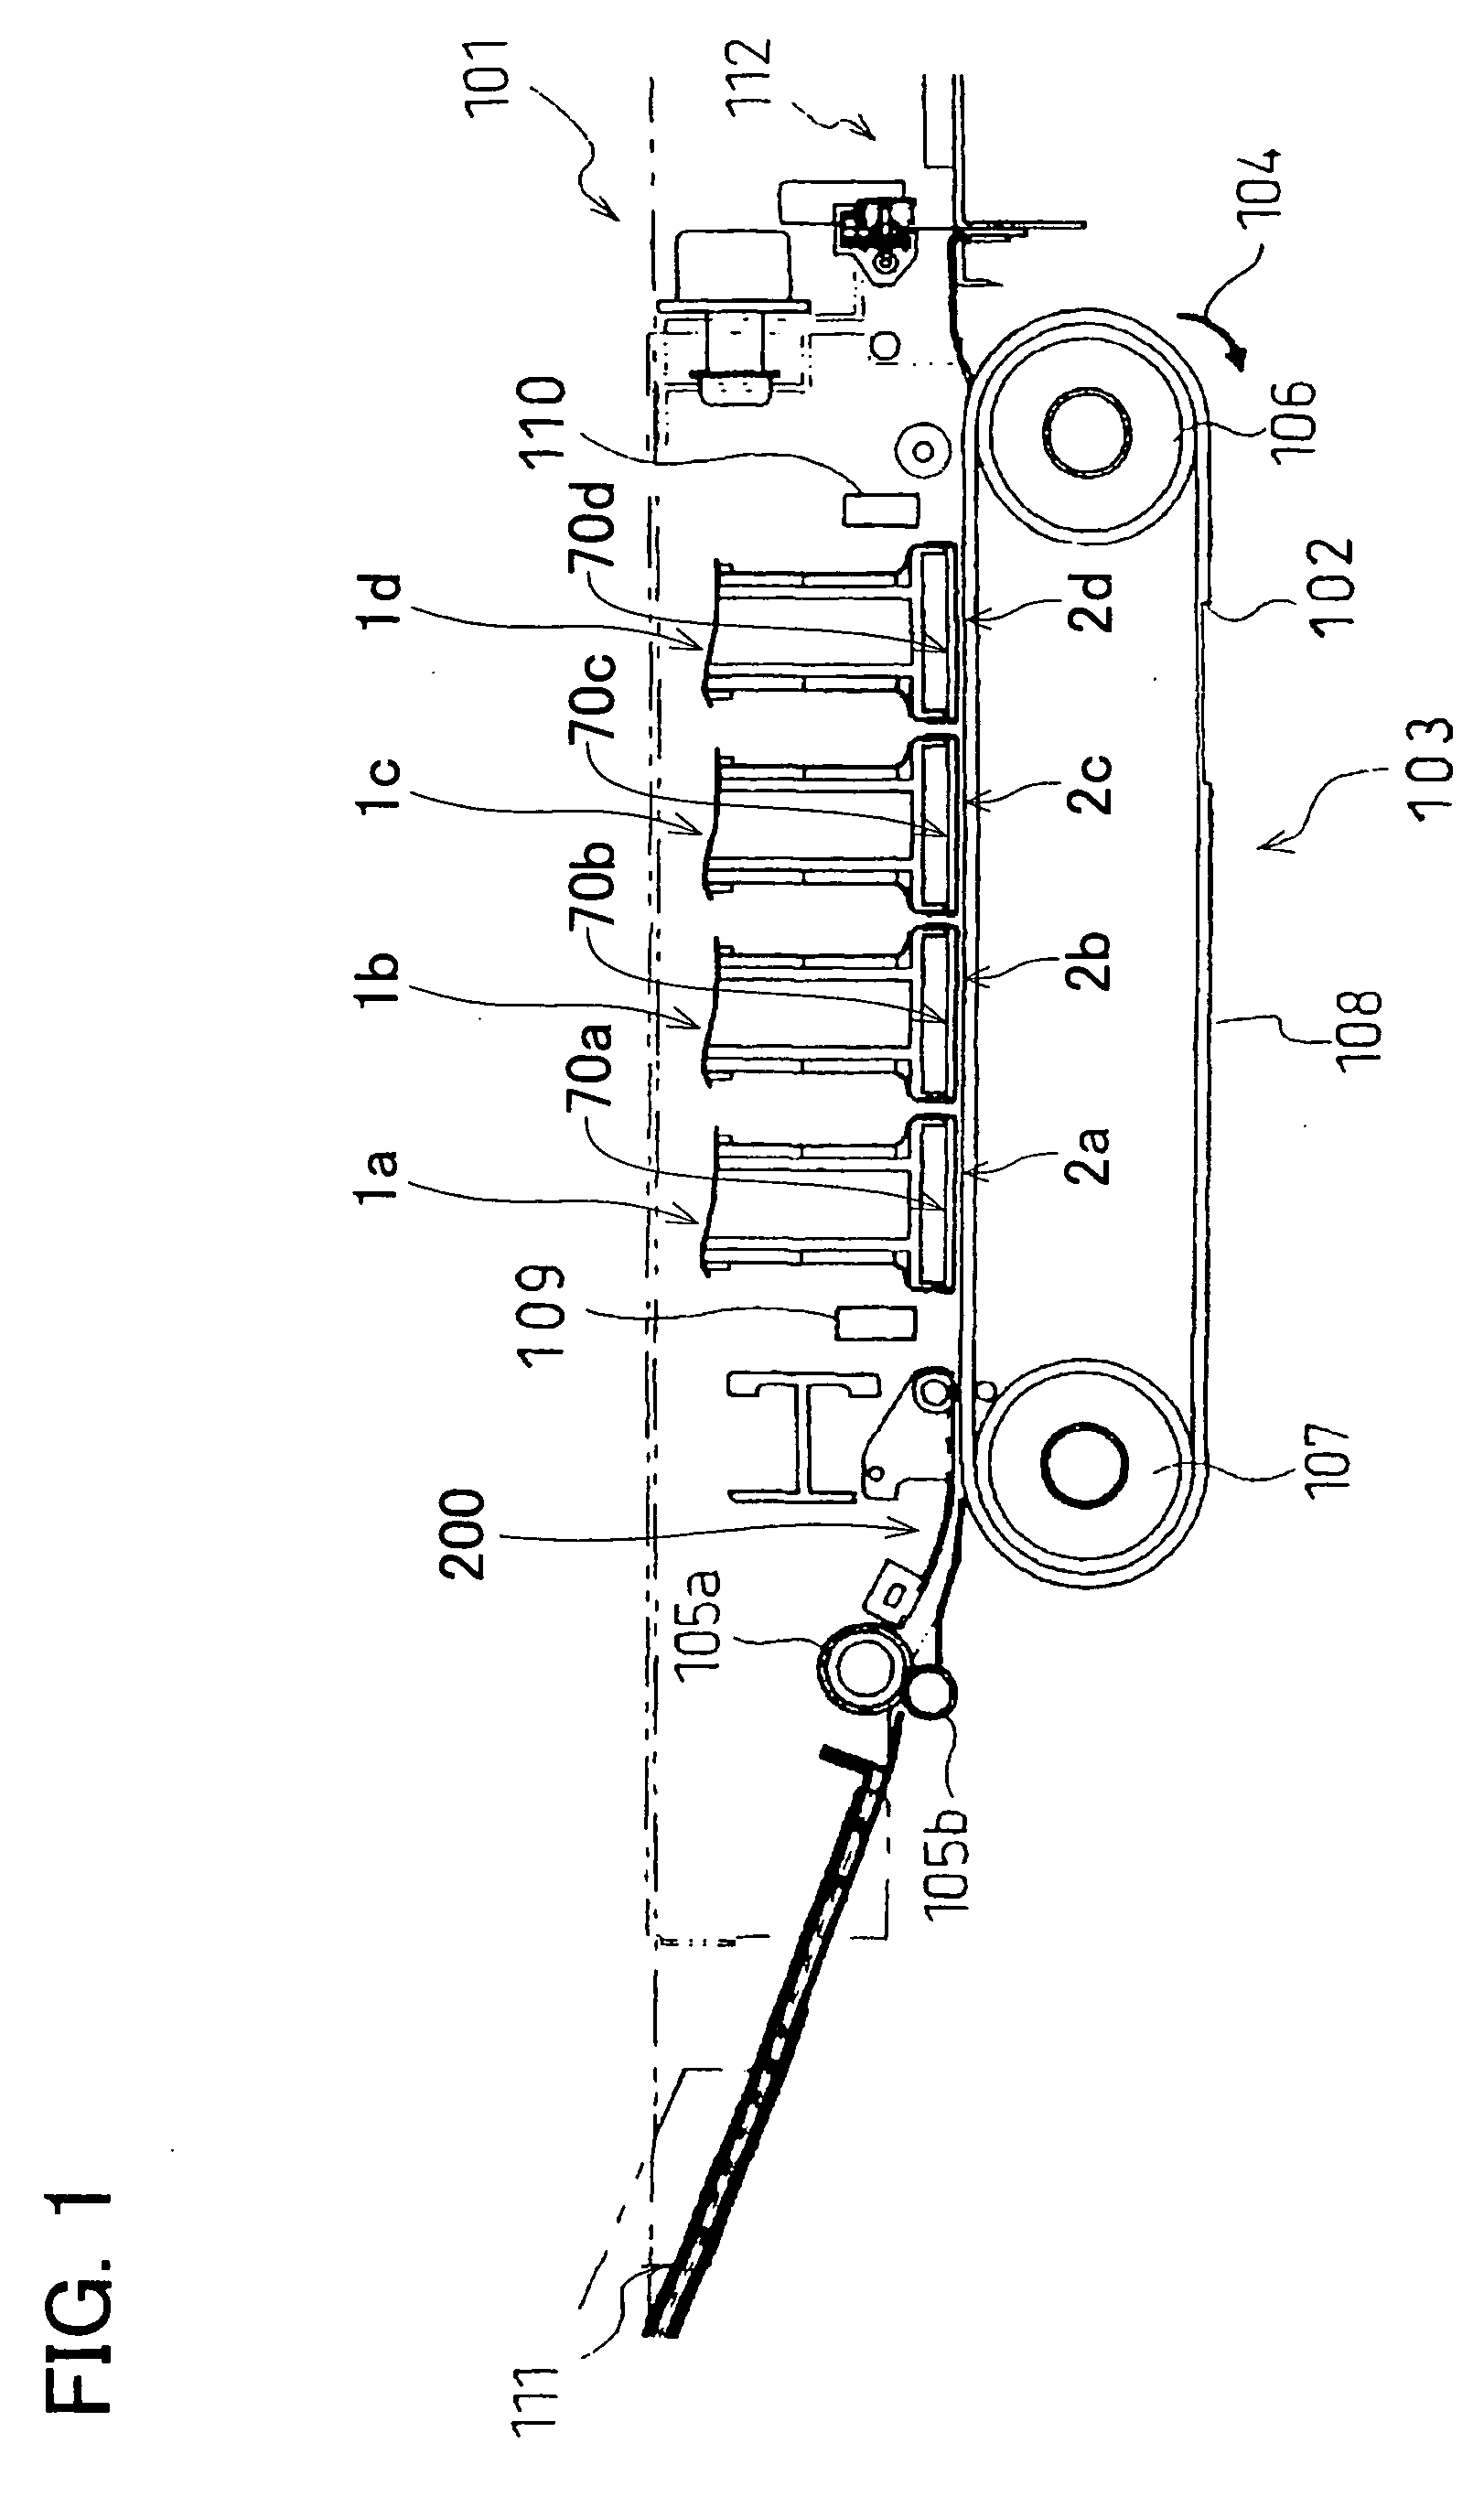 Ink jet printer, method for controlling an ink jet printer, and computer program product for an ink jet printer